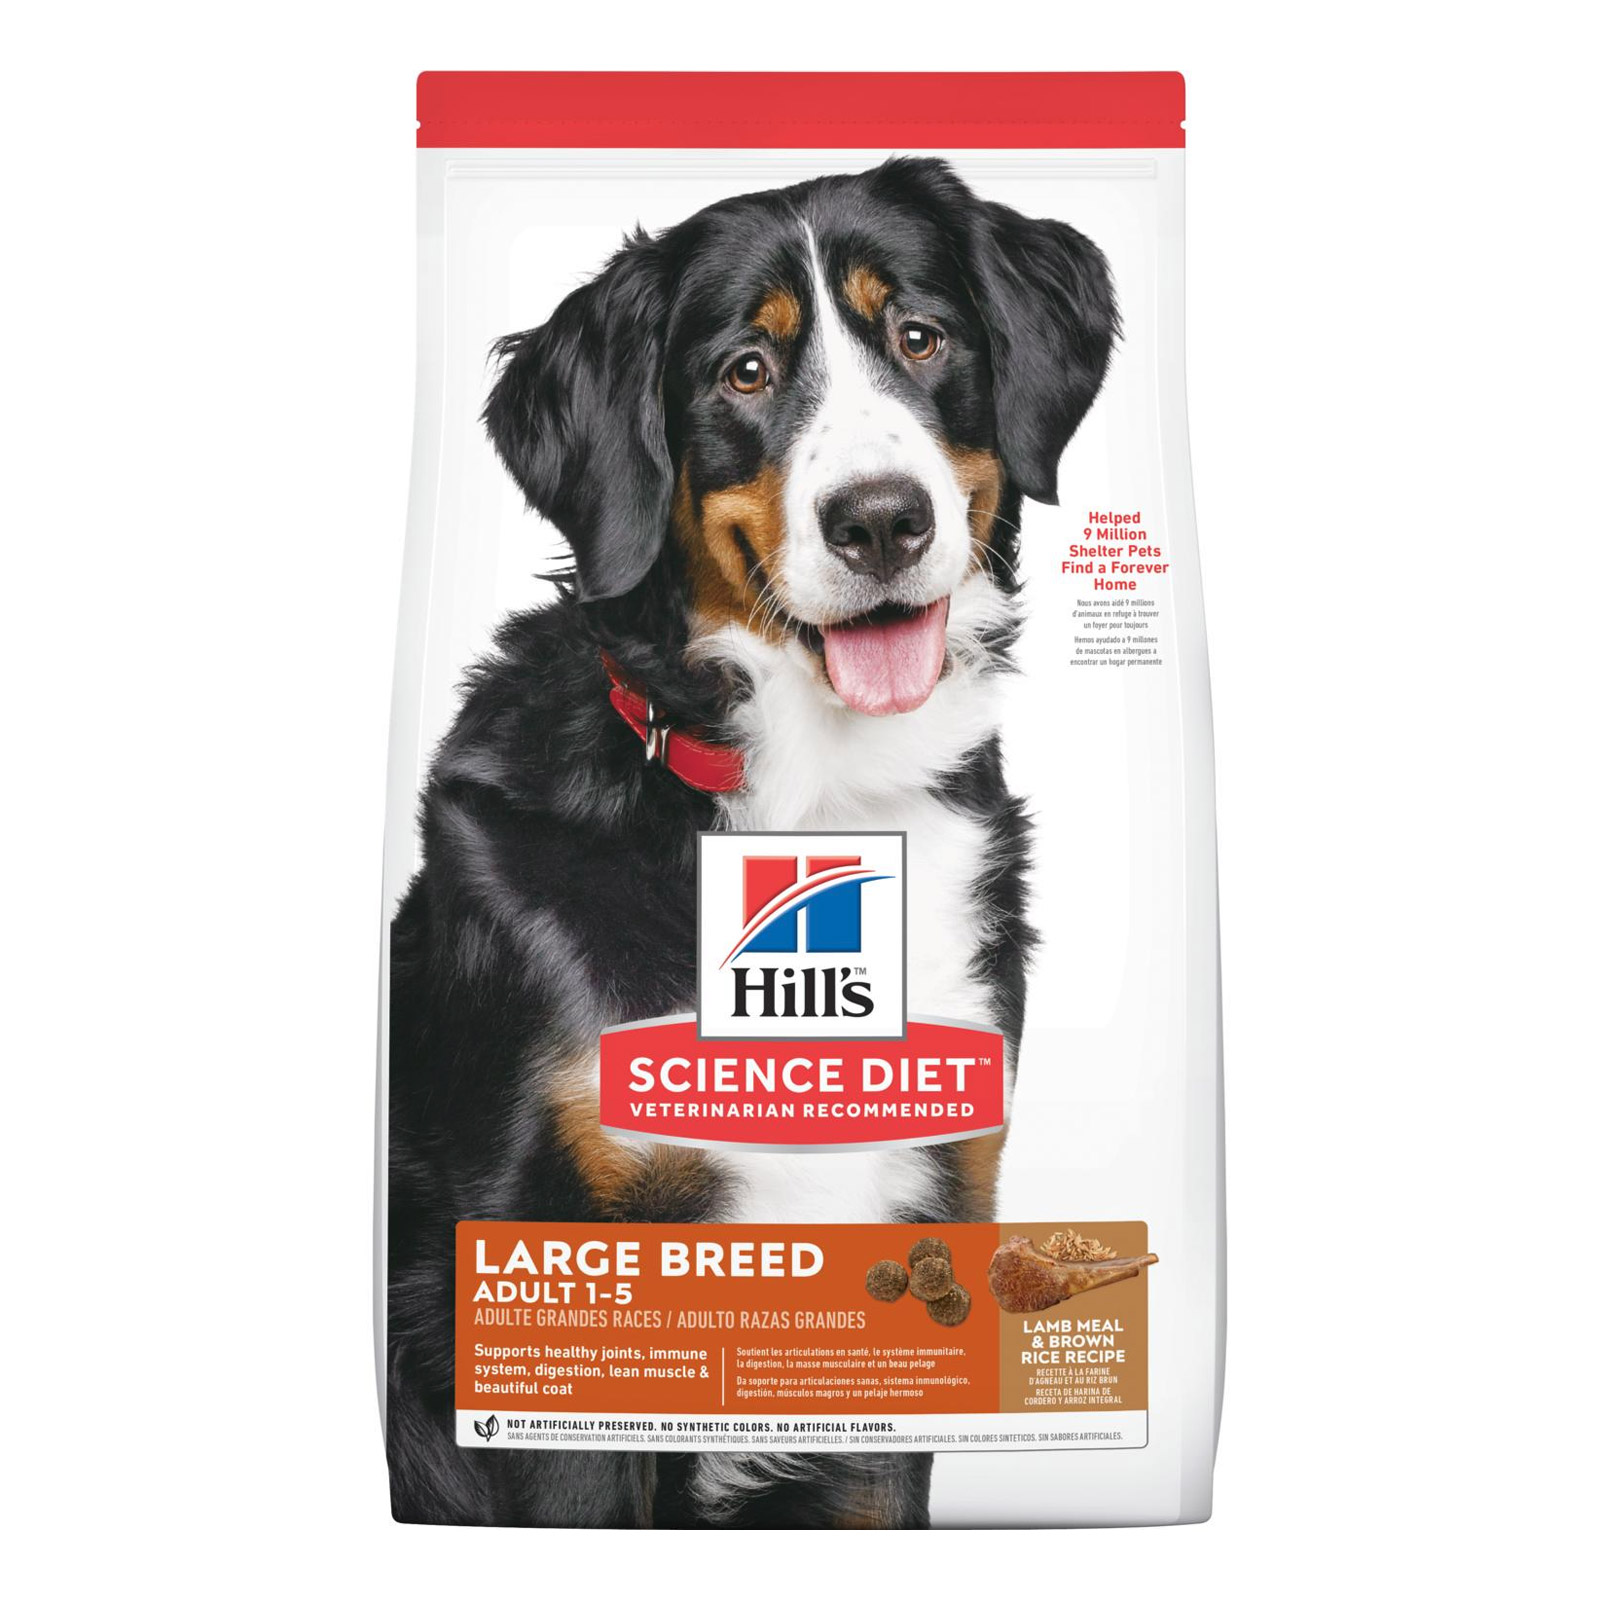 Hill's Science Diet Adult Large Breed Lamb Meal & Brown Rice Dog Food for Food